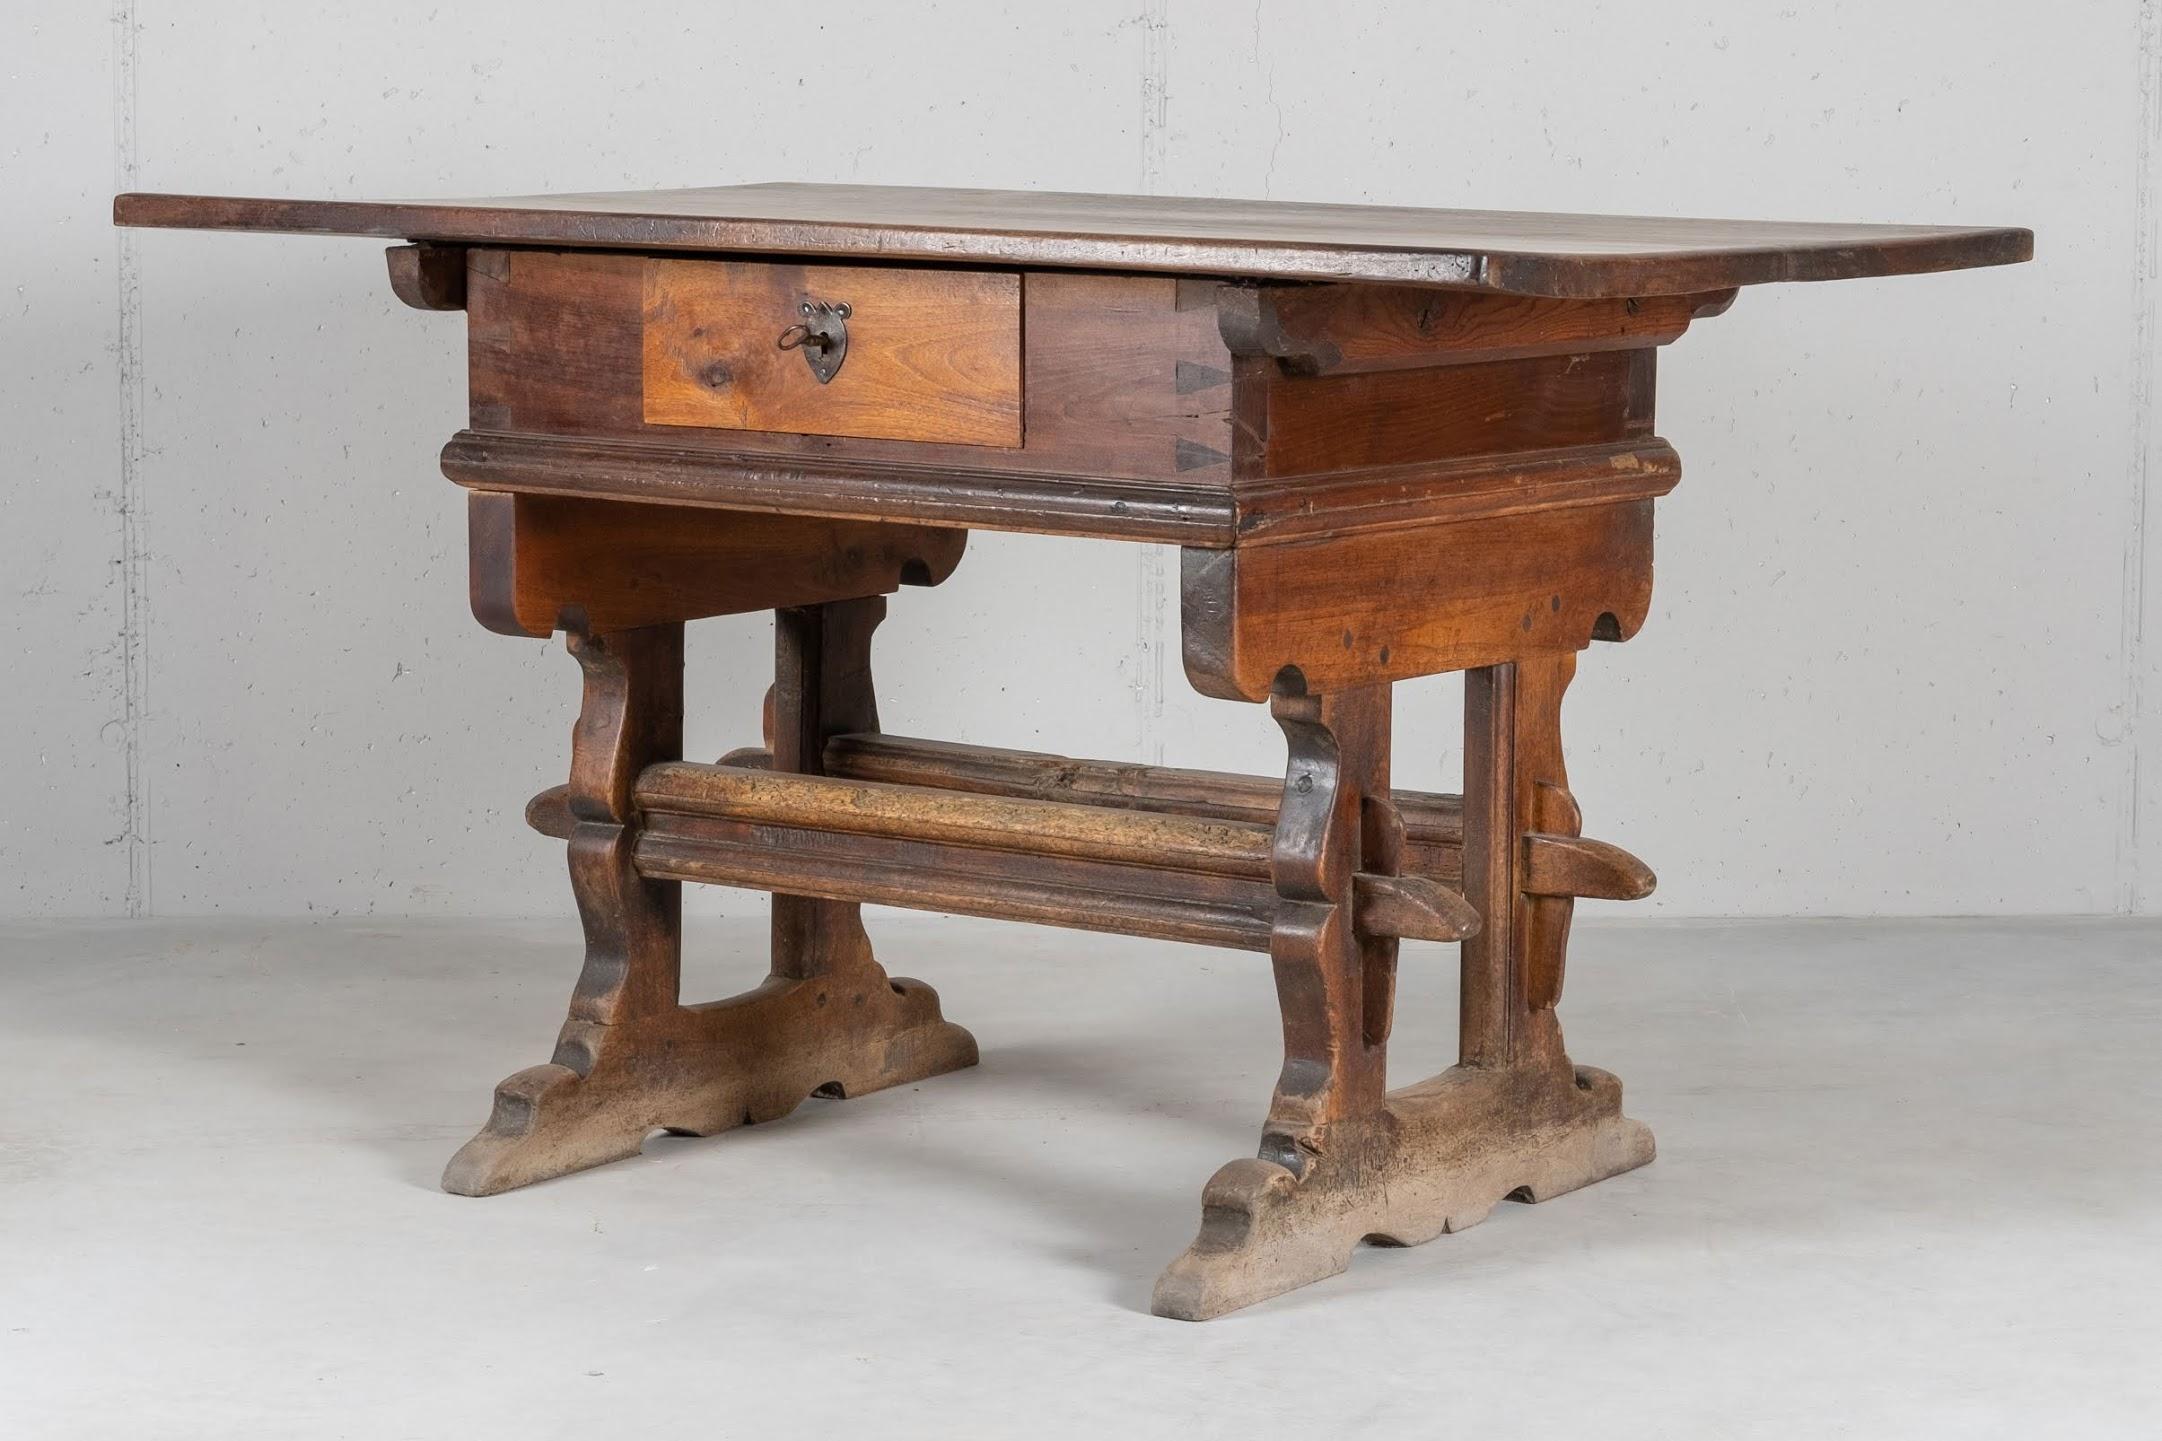 Table typical of the Engadine region in the central south Switzerland. Built in solid walnut in the 17th century, with later modifications.